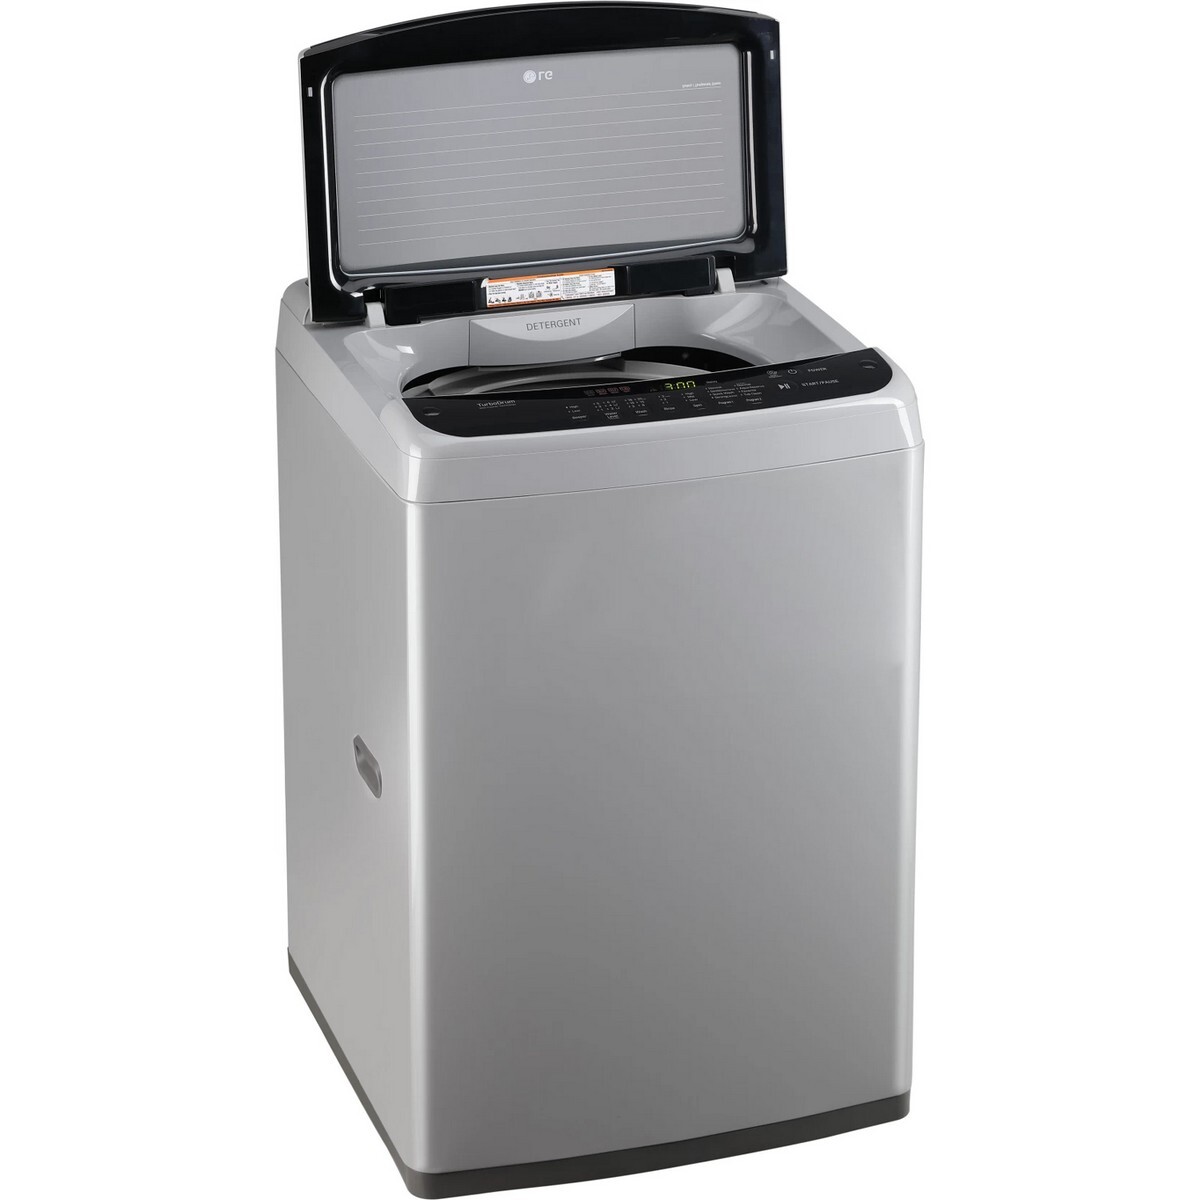 LG T65SPSF2Z Fully Automatic Top Load Washing Machine 6.5Kg 5*